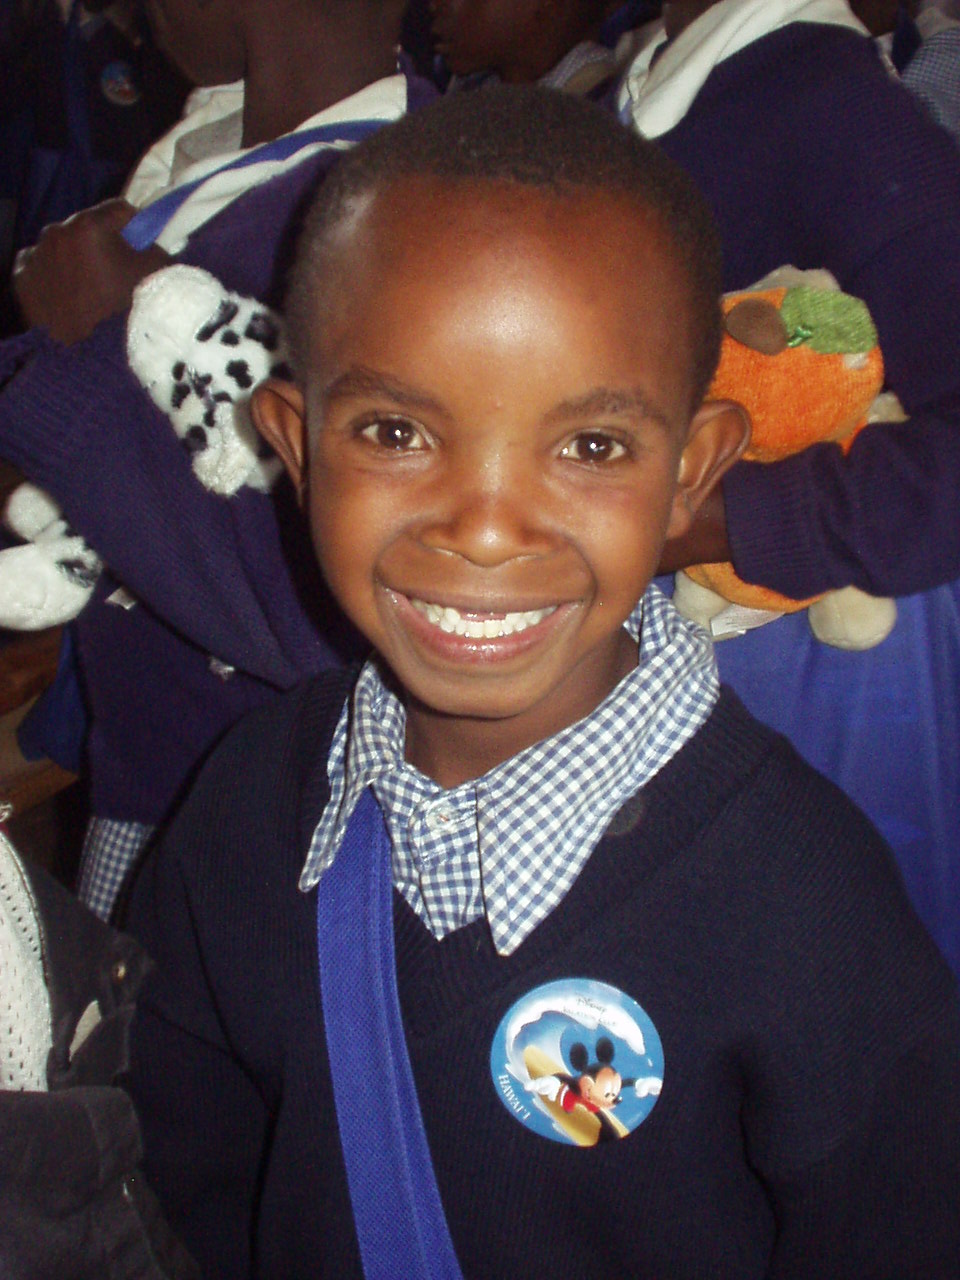 Smiling Kenyan boy after getting school supplies and donations from World Teacher Aid